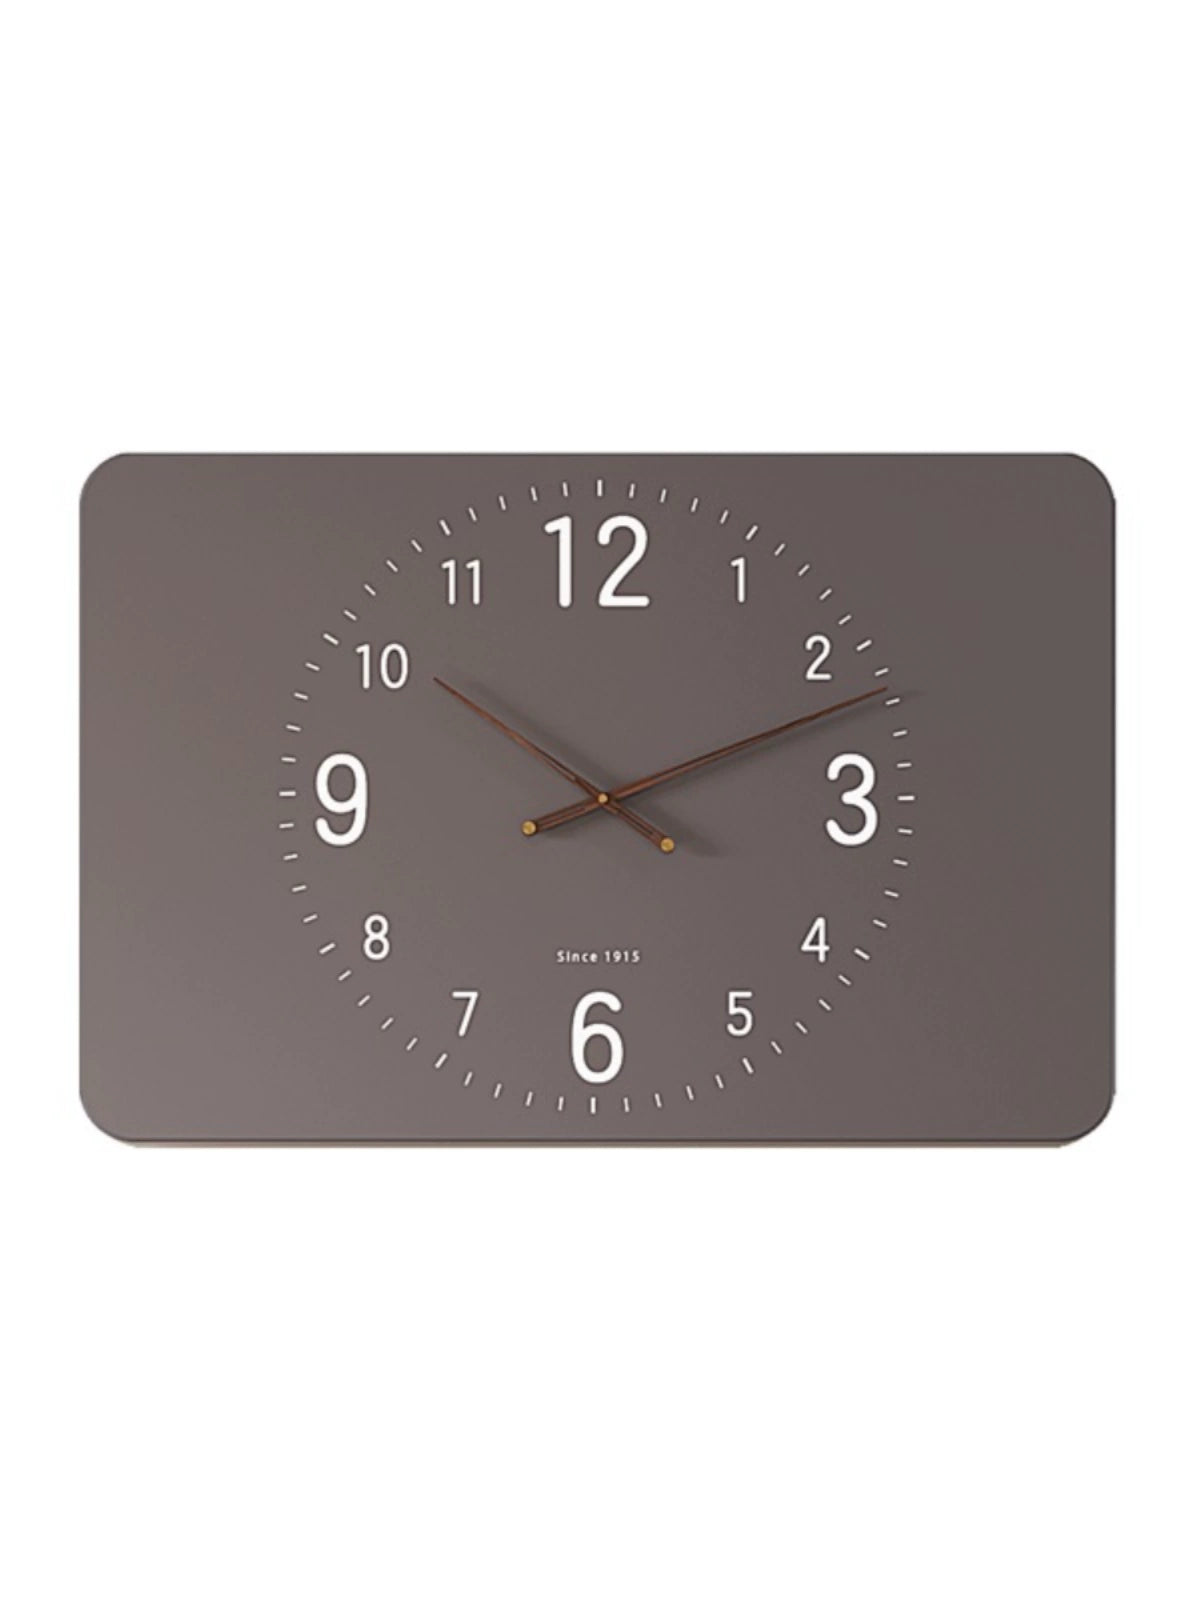 Decorative Switch Box Cover Wall Mounted Clock